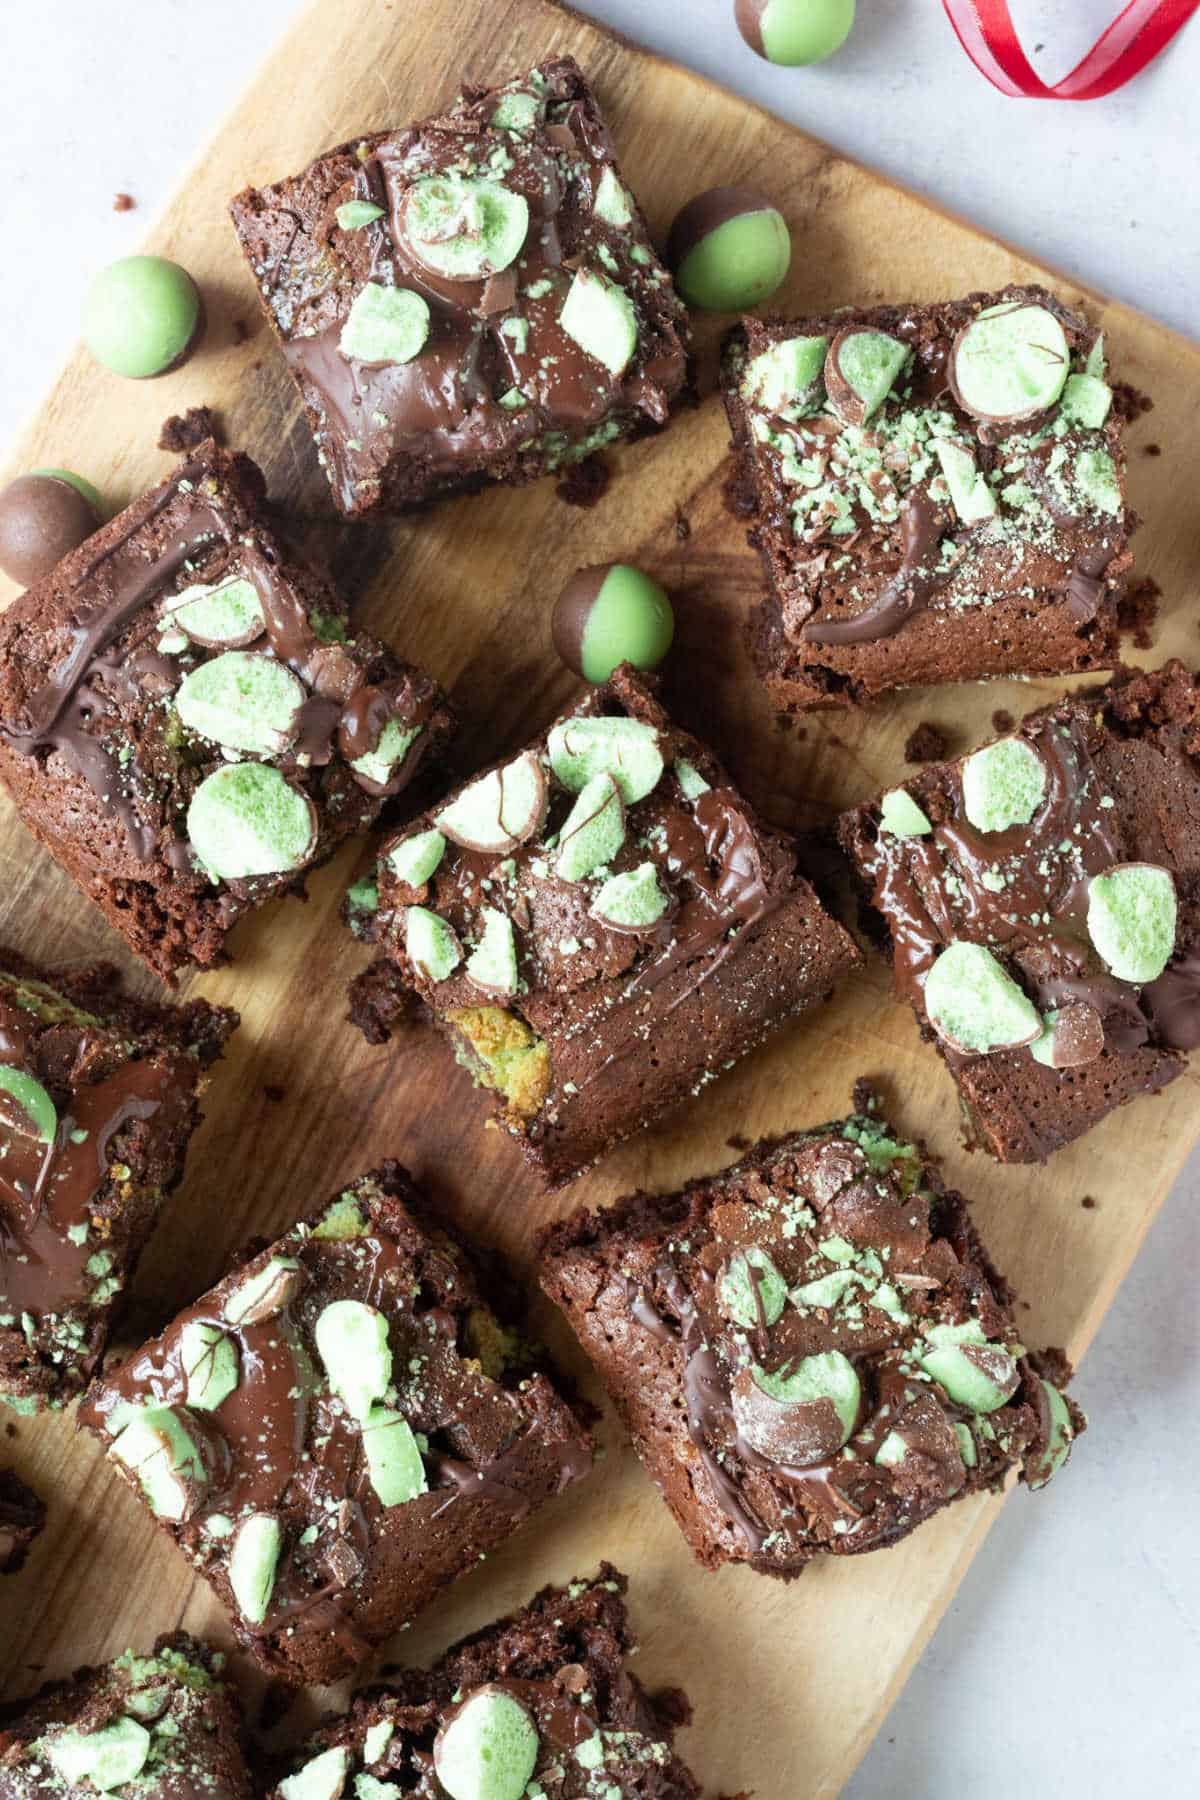 Mint aero chocolate brownies on a wooden board.